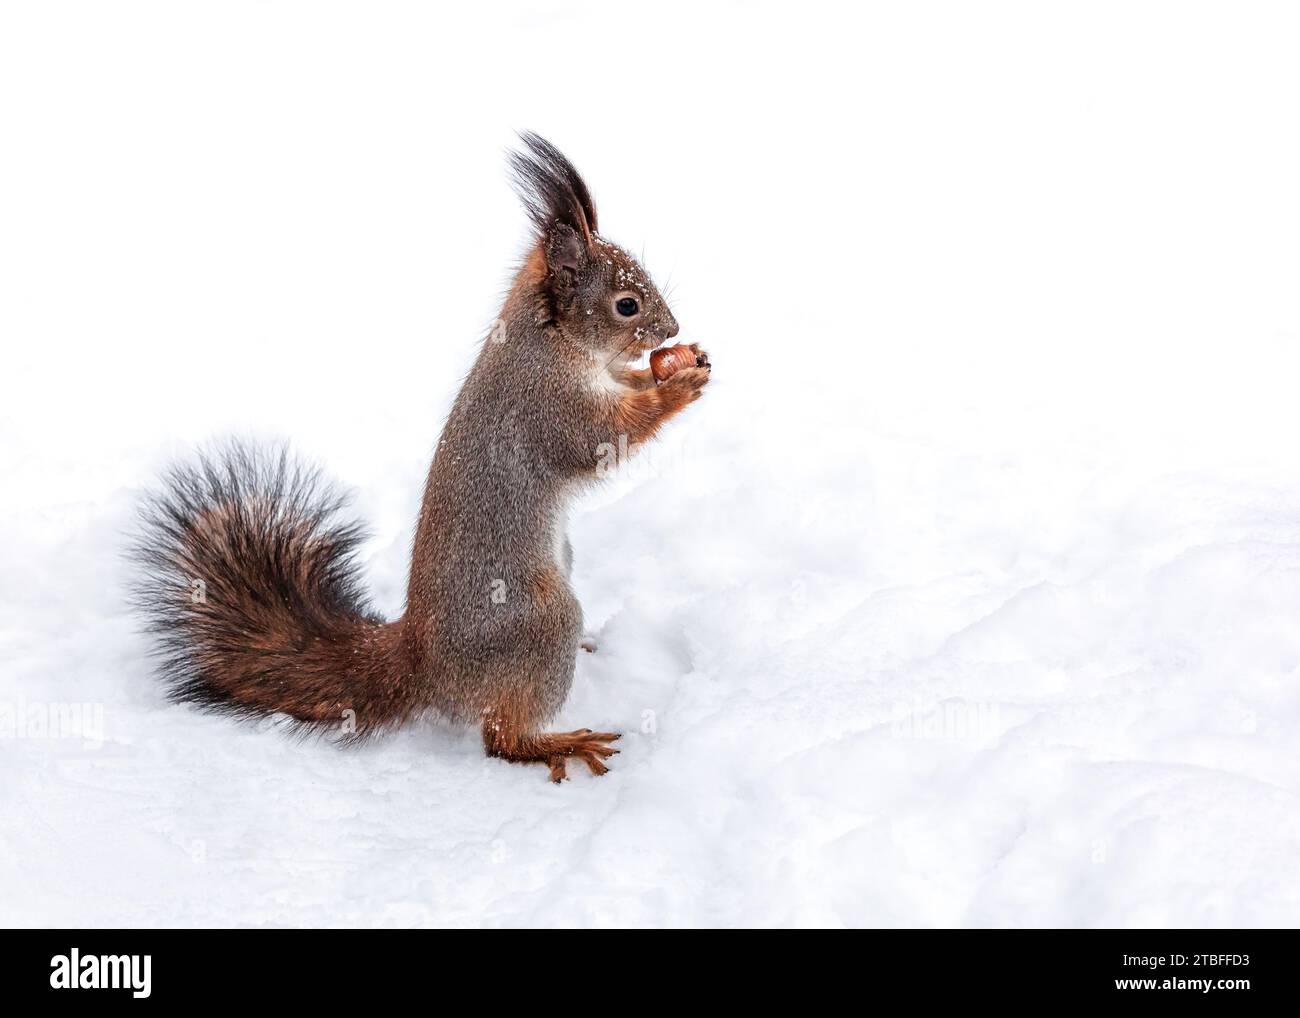 little red squirrel standing in snow with nut in paws. Stock Photo